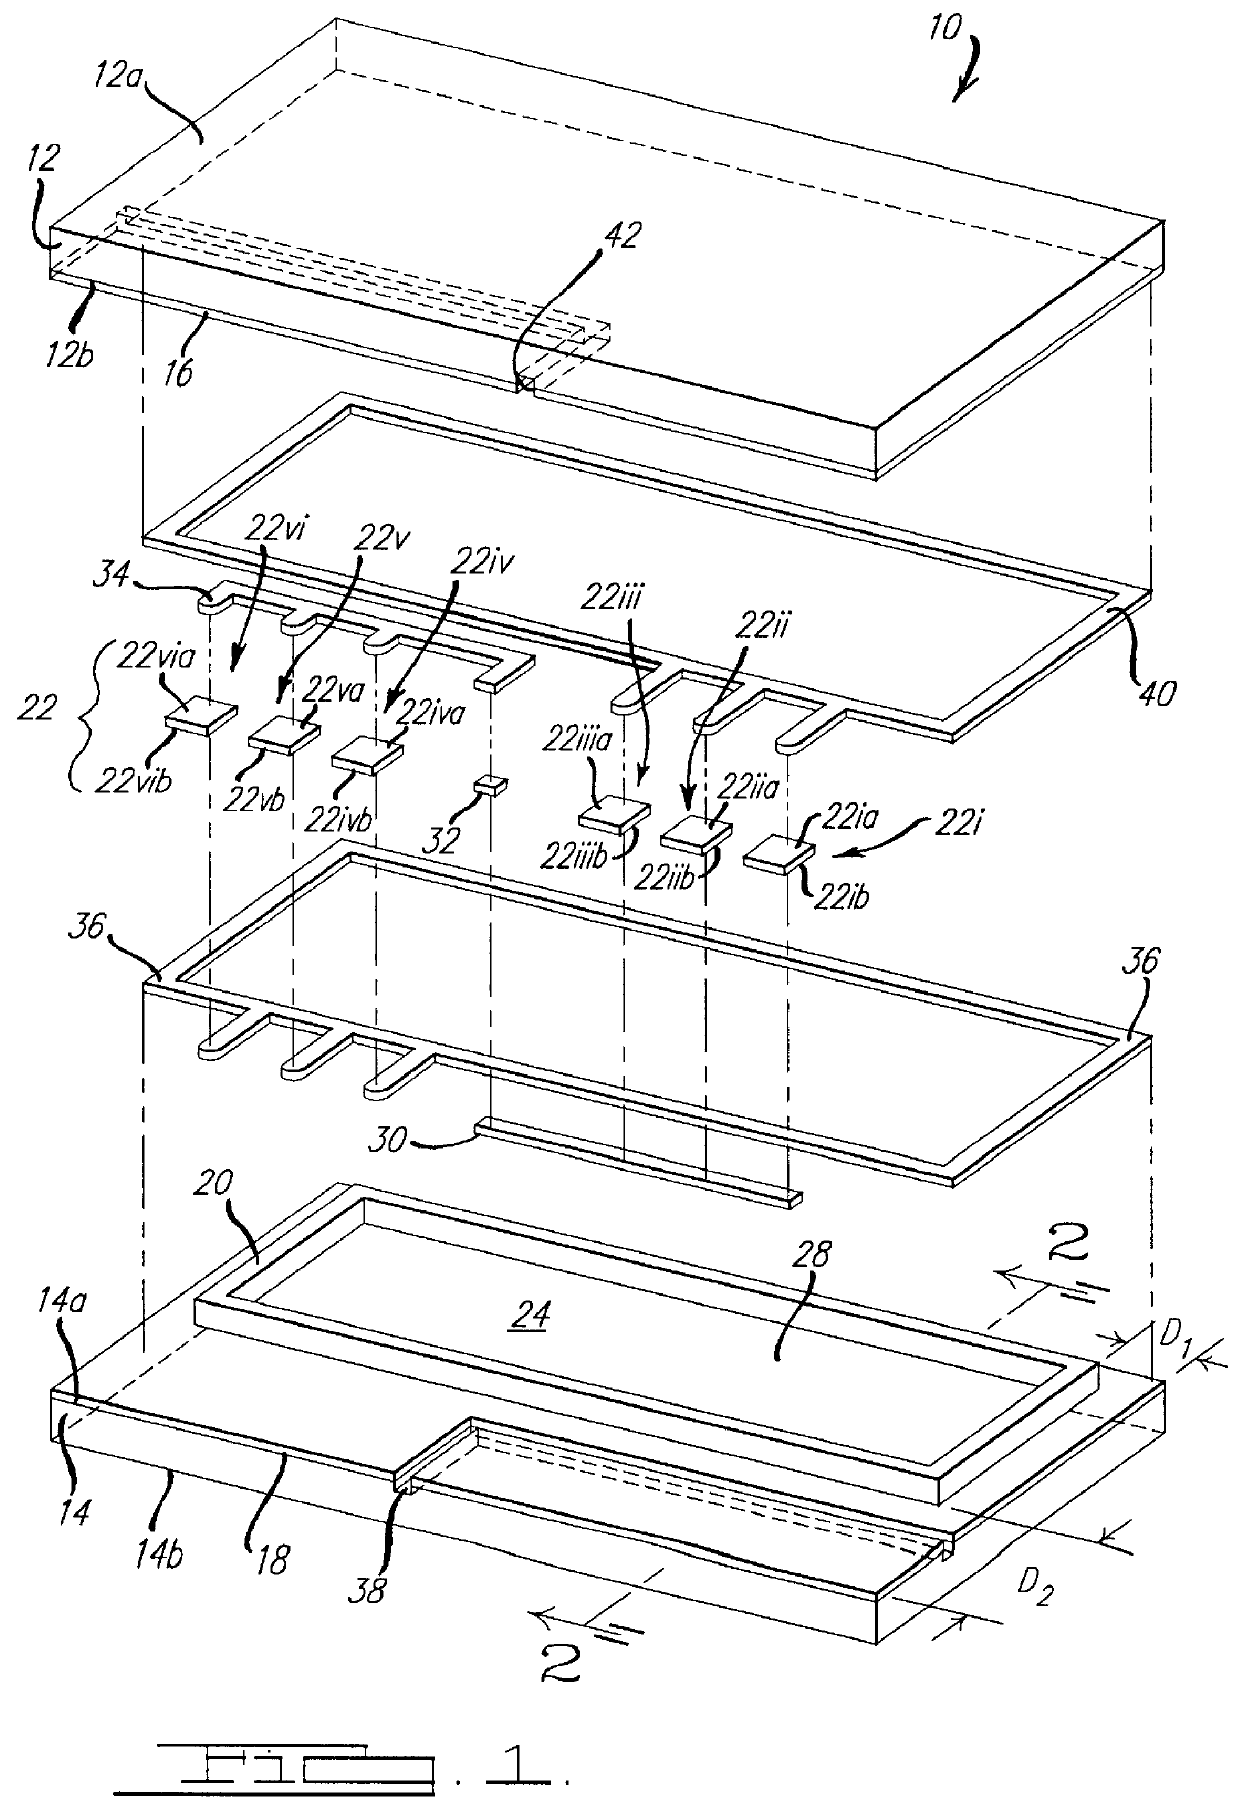 Electro-optic window incorporating a discrete photovoltaic device and apparatus for making same